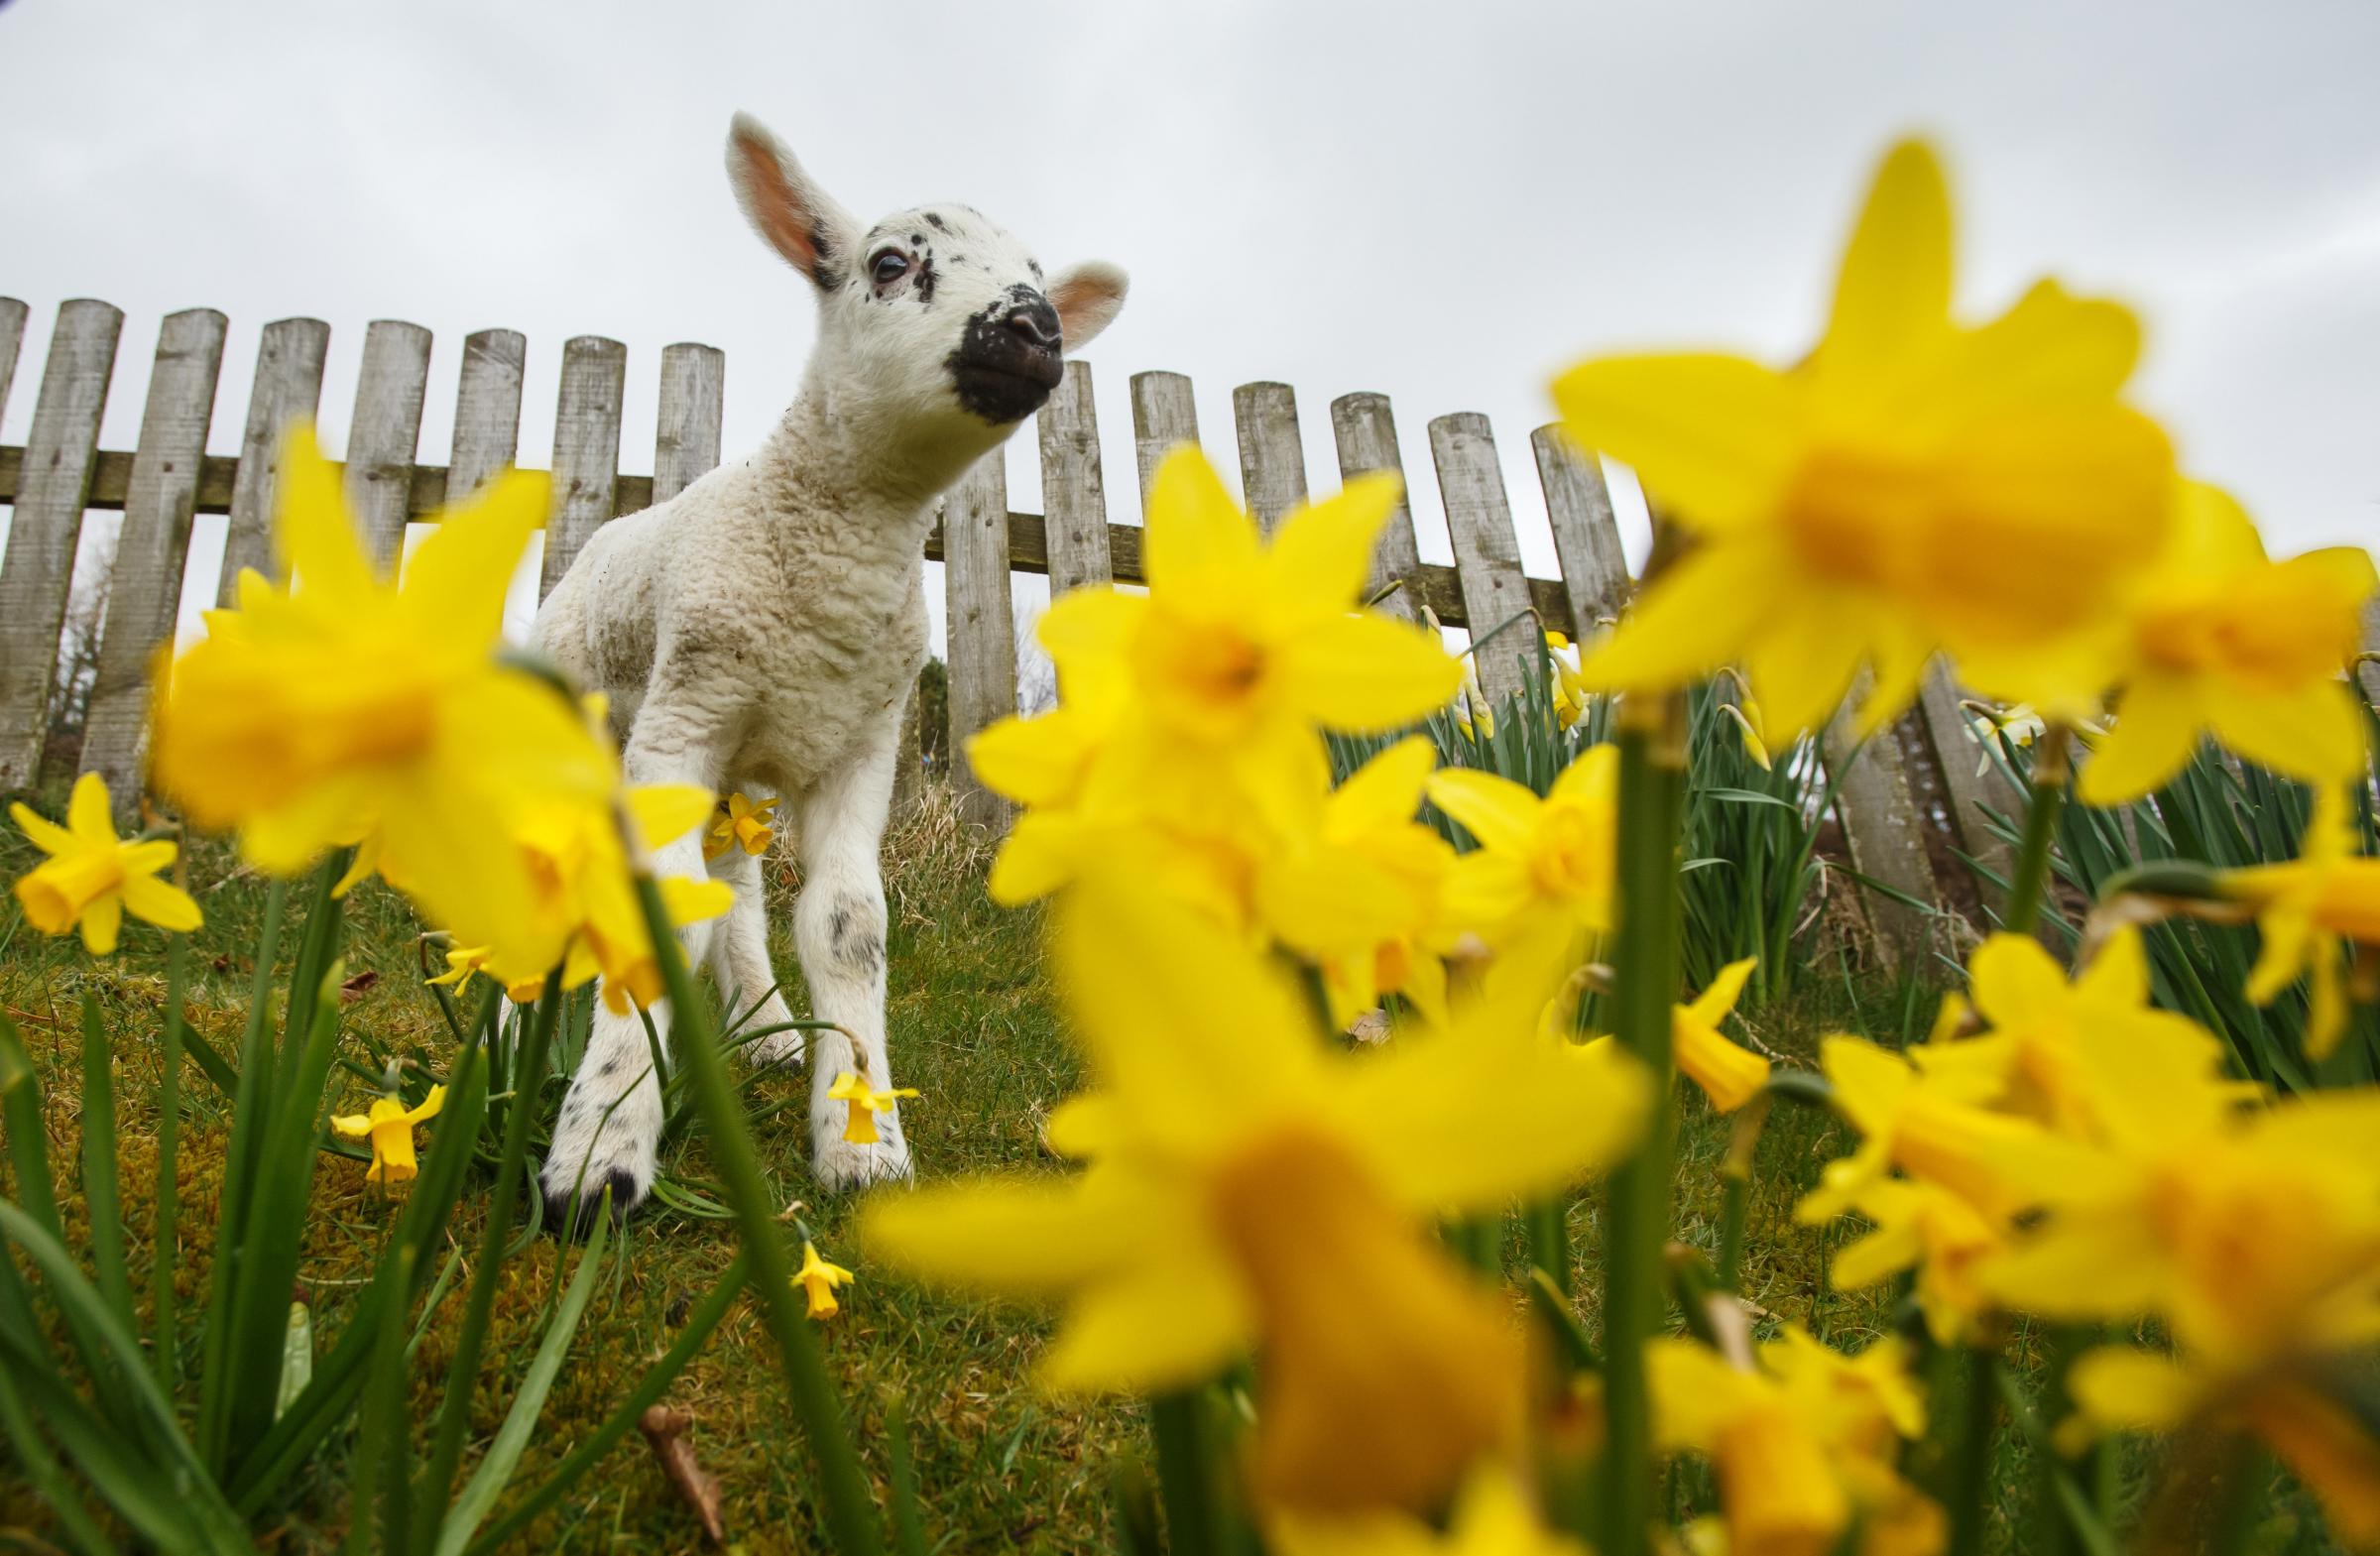 A 10 day old lamb pictured among daffodils at Craigmaddie Muir farm near Milngavie. The farm belongs to Gordon Murray and his partner Susie Abernethy. Photograph by Colin Mearns.